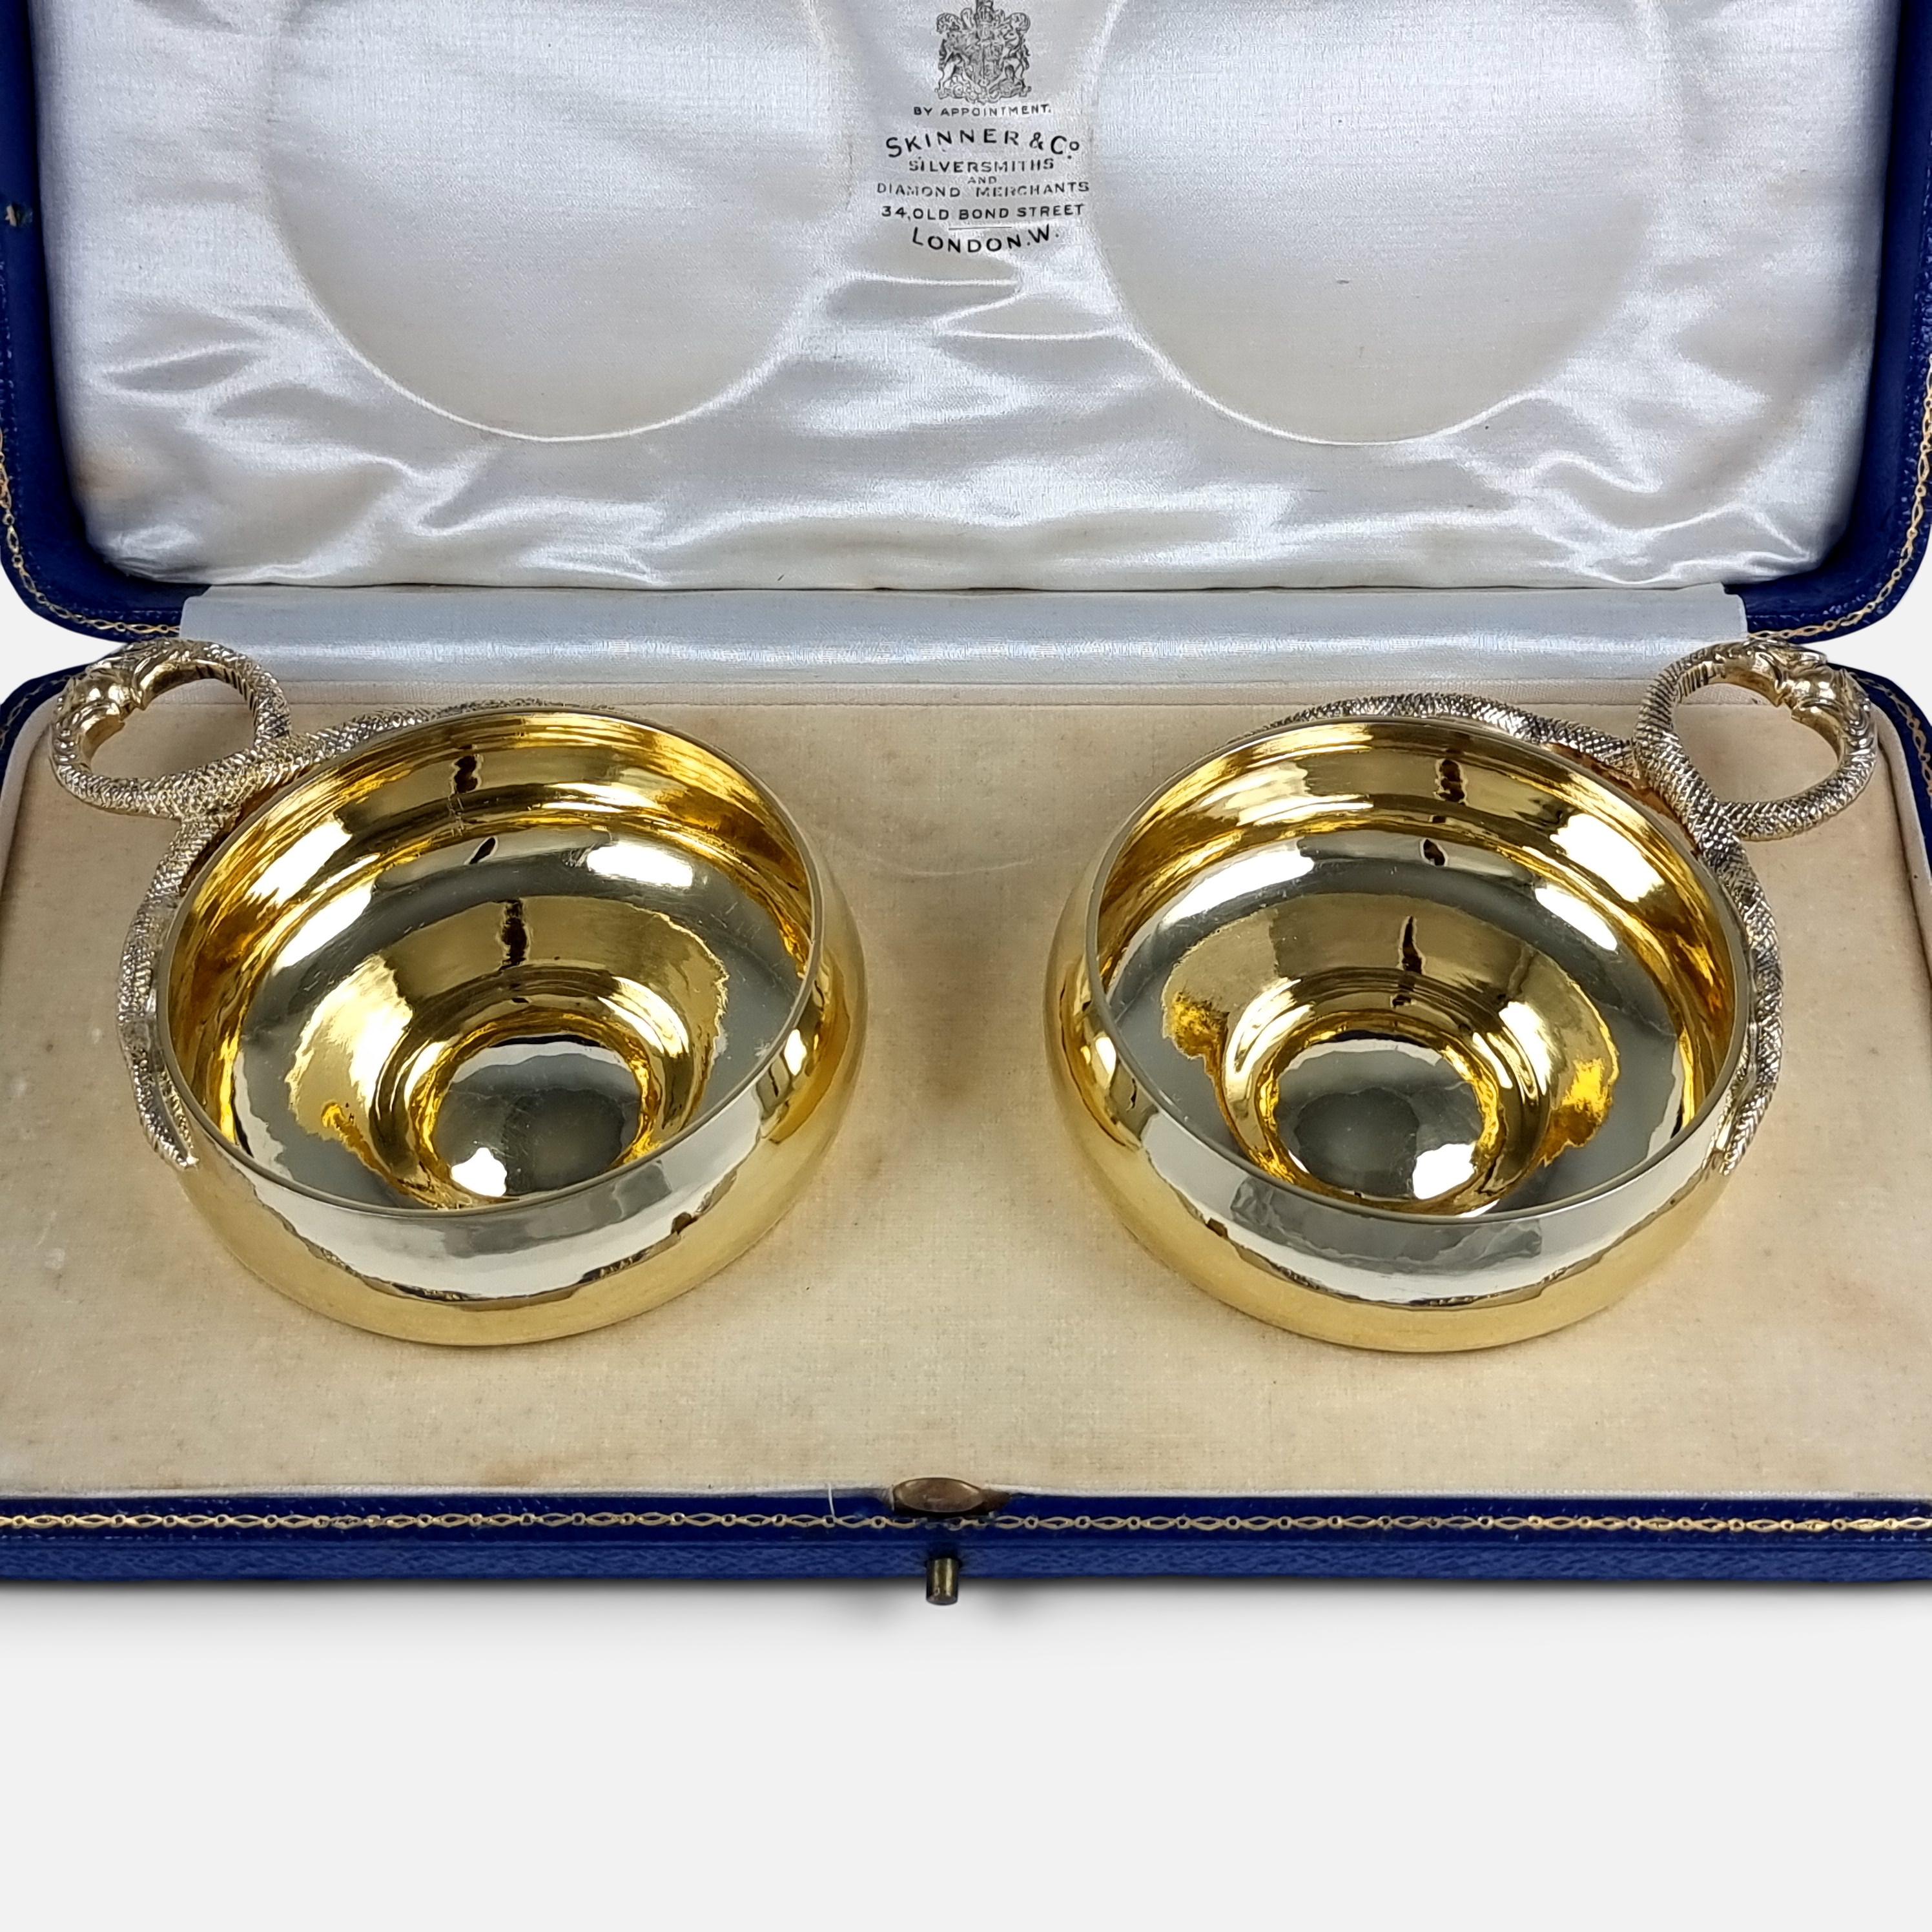 A cased pair of George V sterling silver-gilt wine taster cups. The wine taster (otherwise known as tasse de vin) cups are of round form, with spot-hammered finish, and each with a single snakehead handle. 

The wine tasters are stored in their